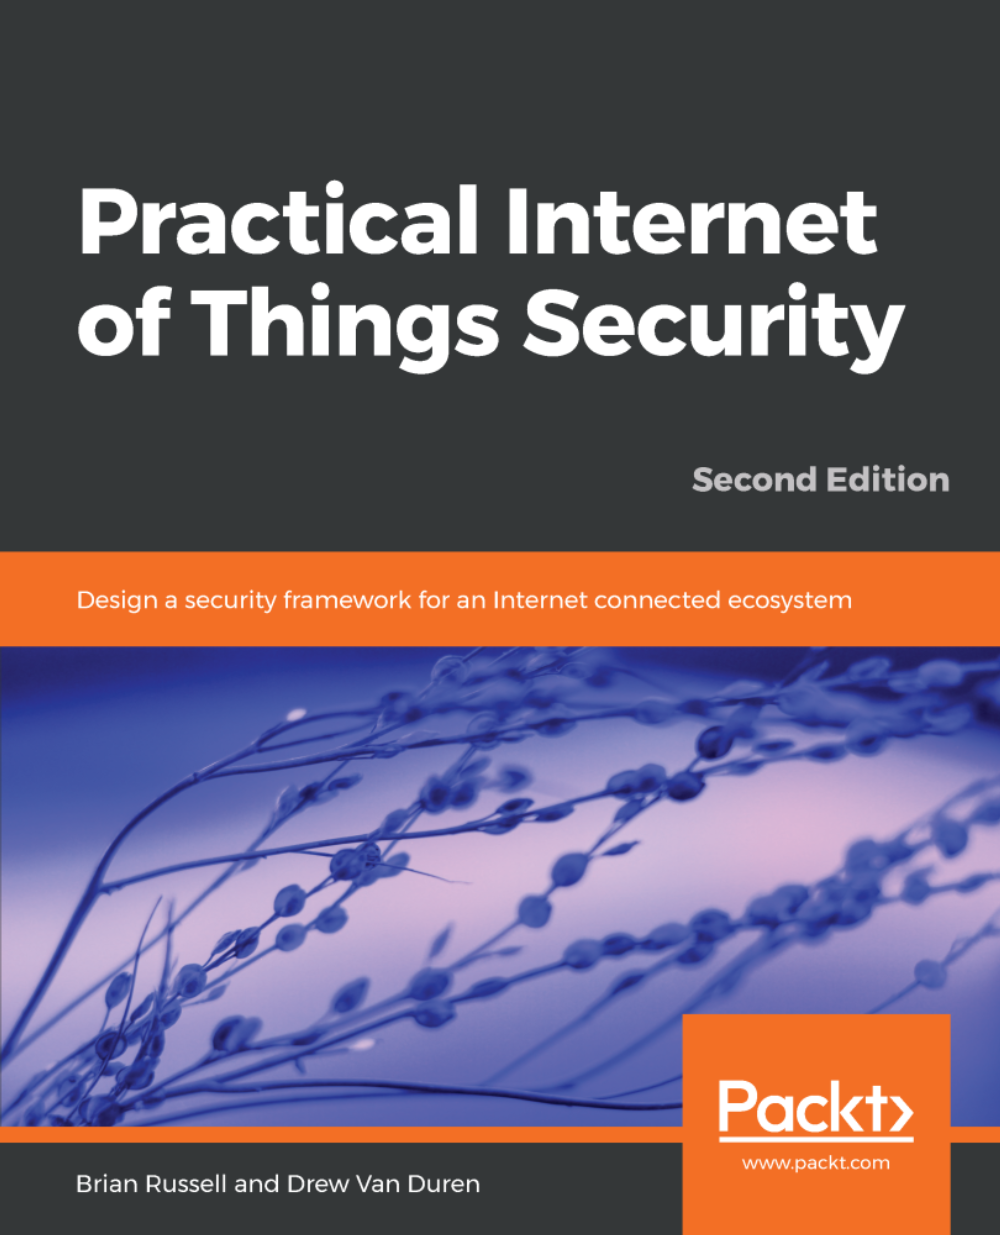 Practical Internet of Things Security - Second Edition | ebook